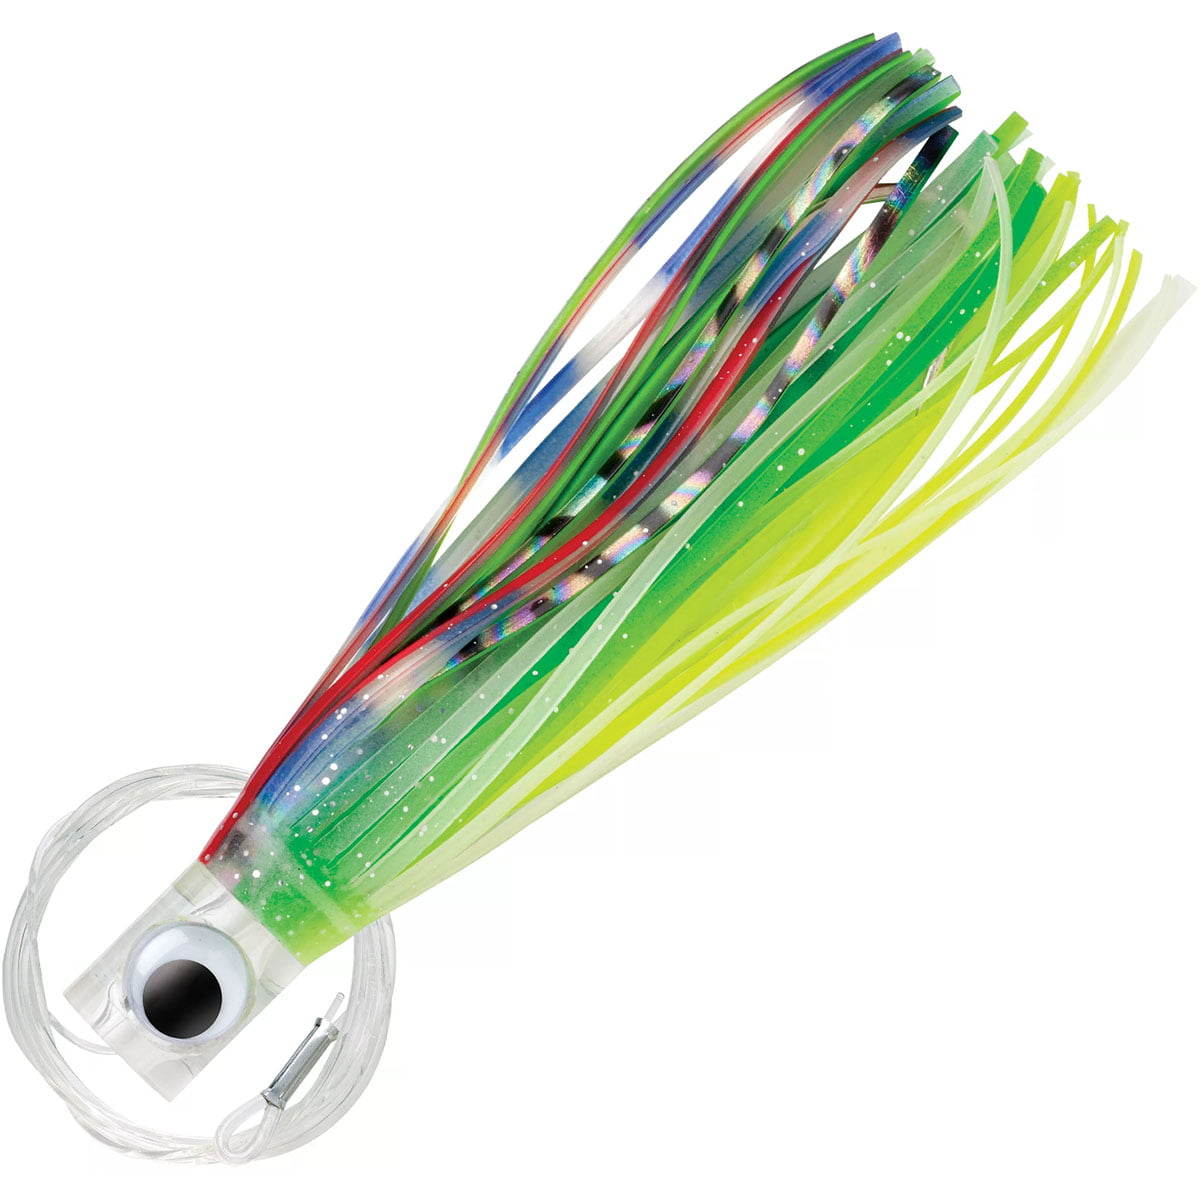 Williamson WCR6BO Wahoo Catcher 6 Rigged Bonito Fishing Lure for sale online 